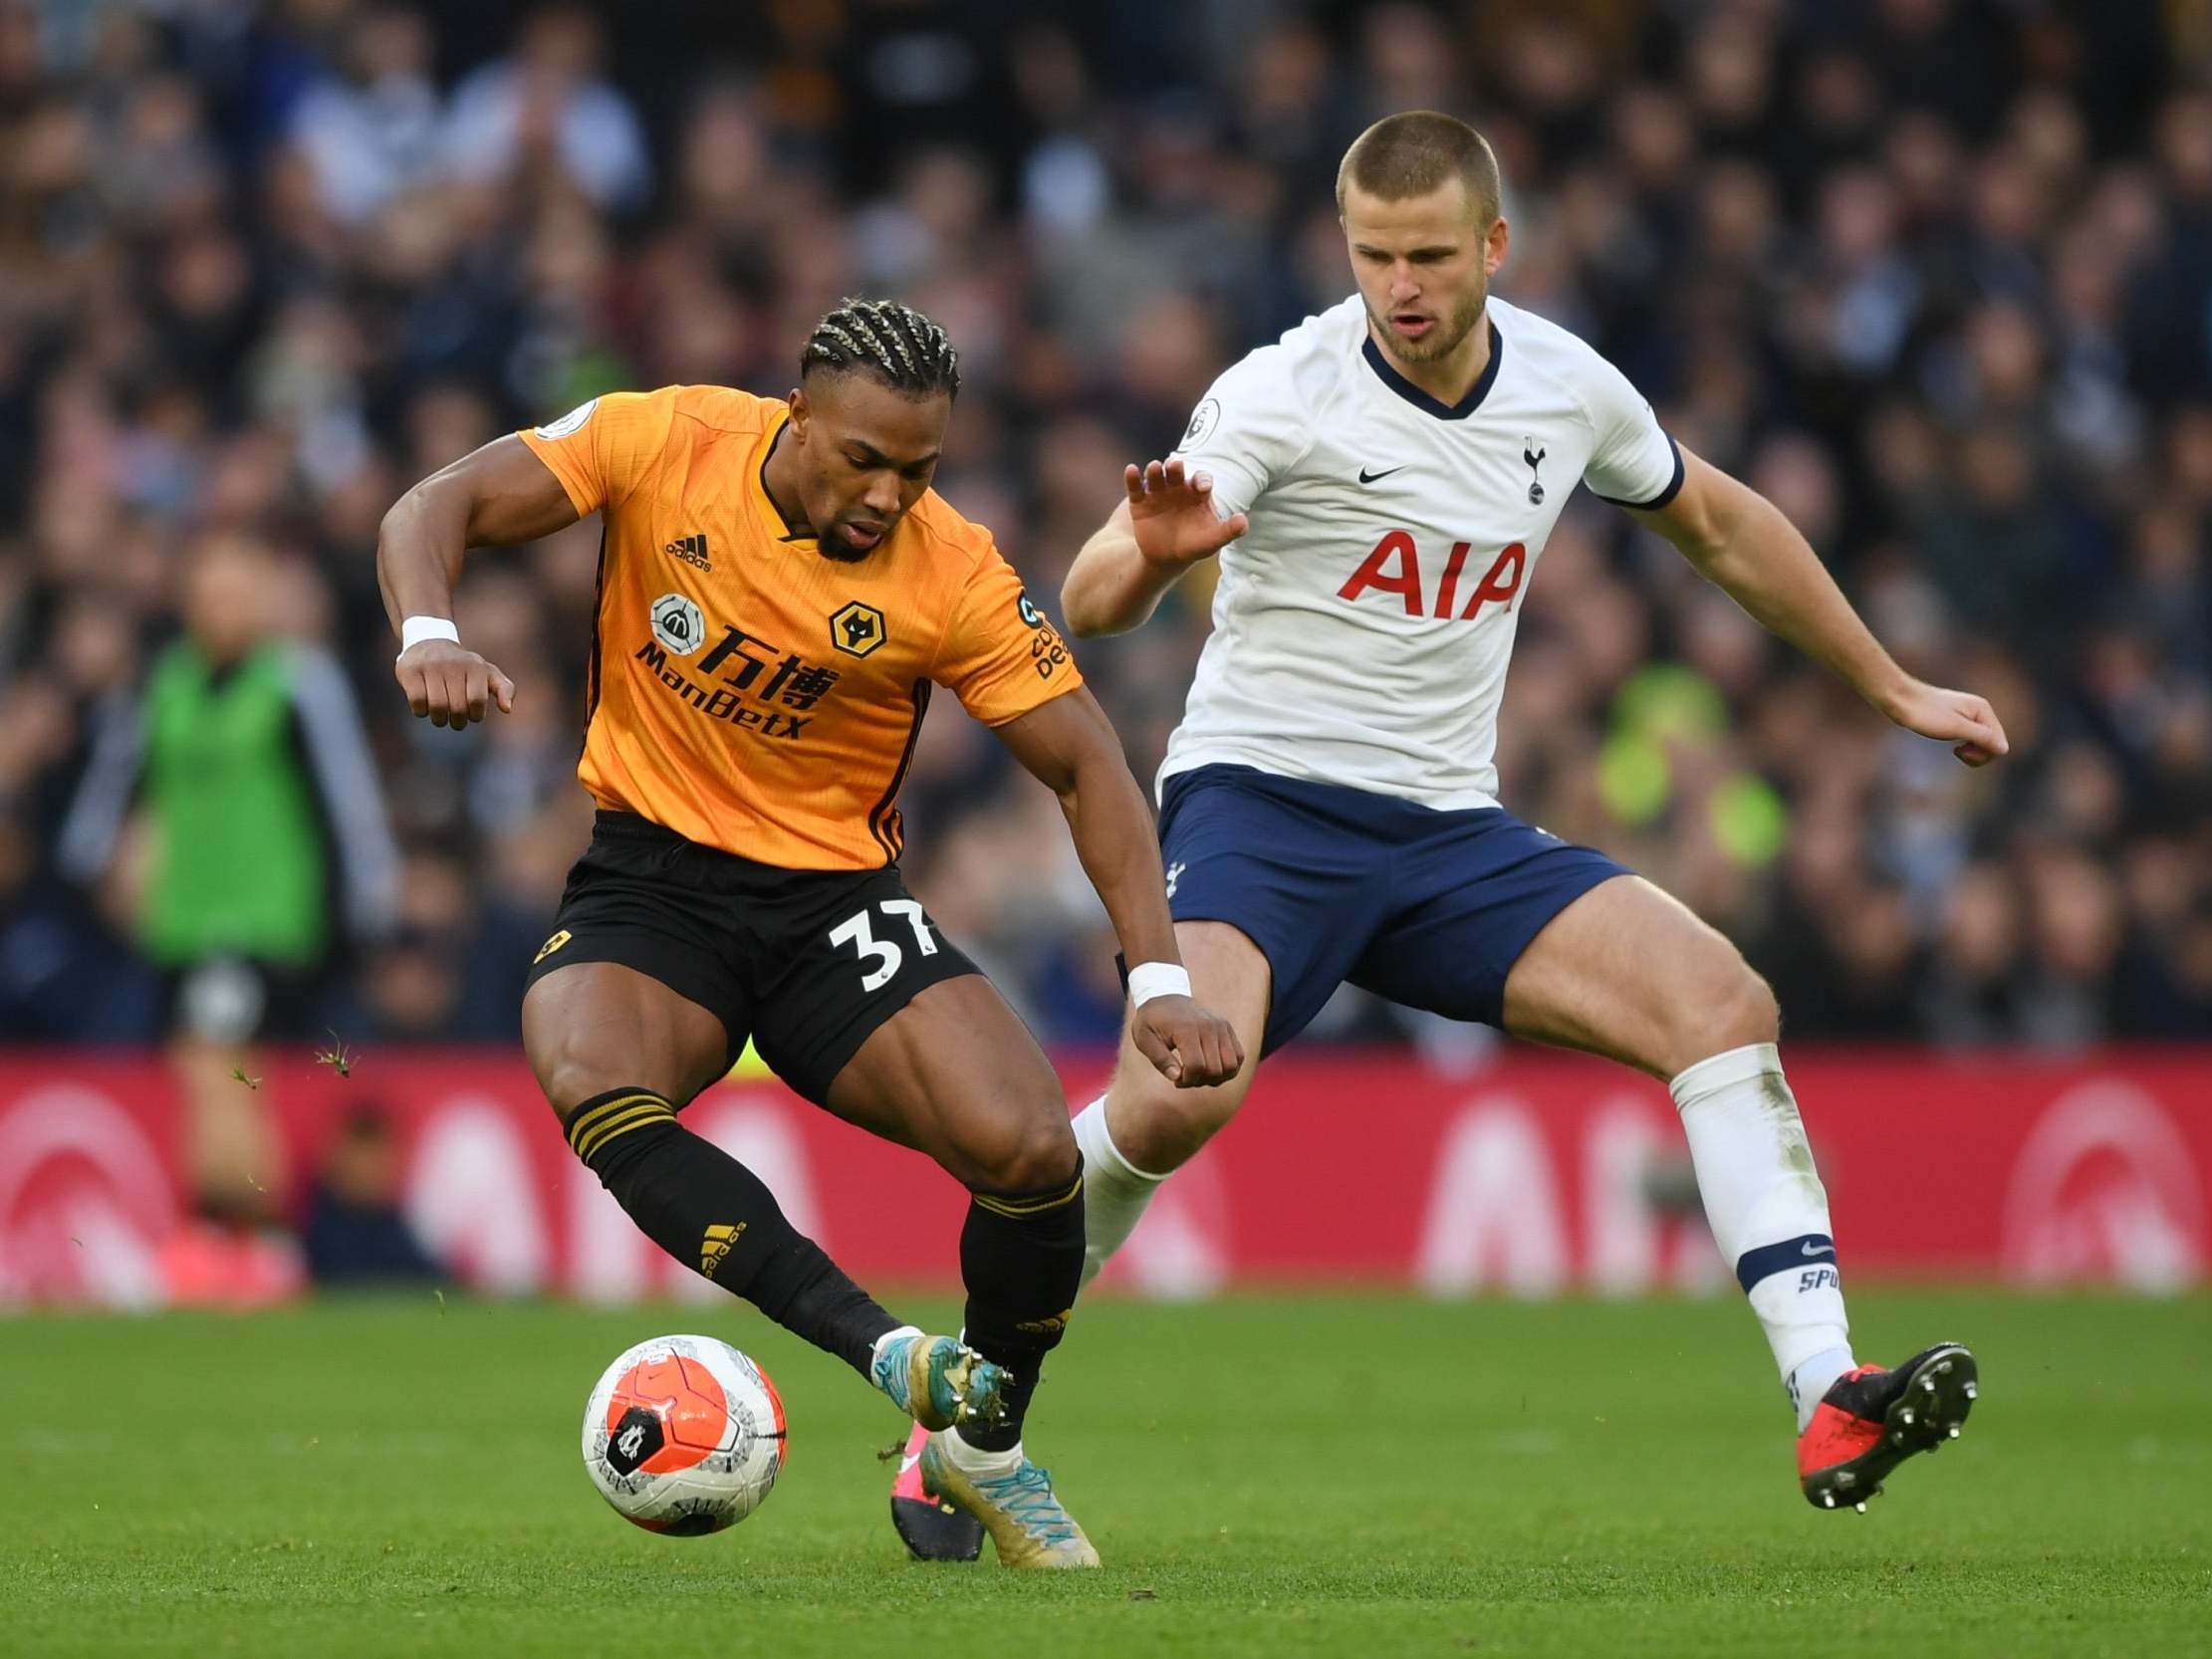 Adama Traore of Wolverhampton Wanderers battles for possession with Eric Dier of Tottenham Hotspur